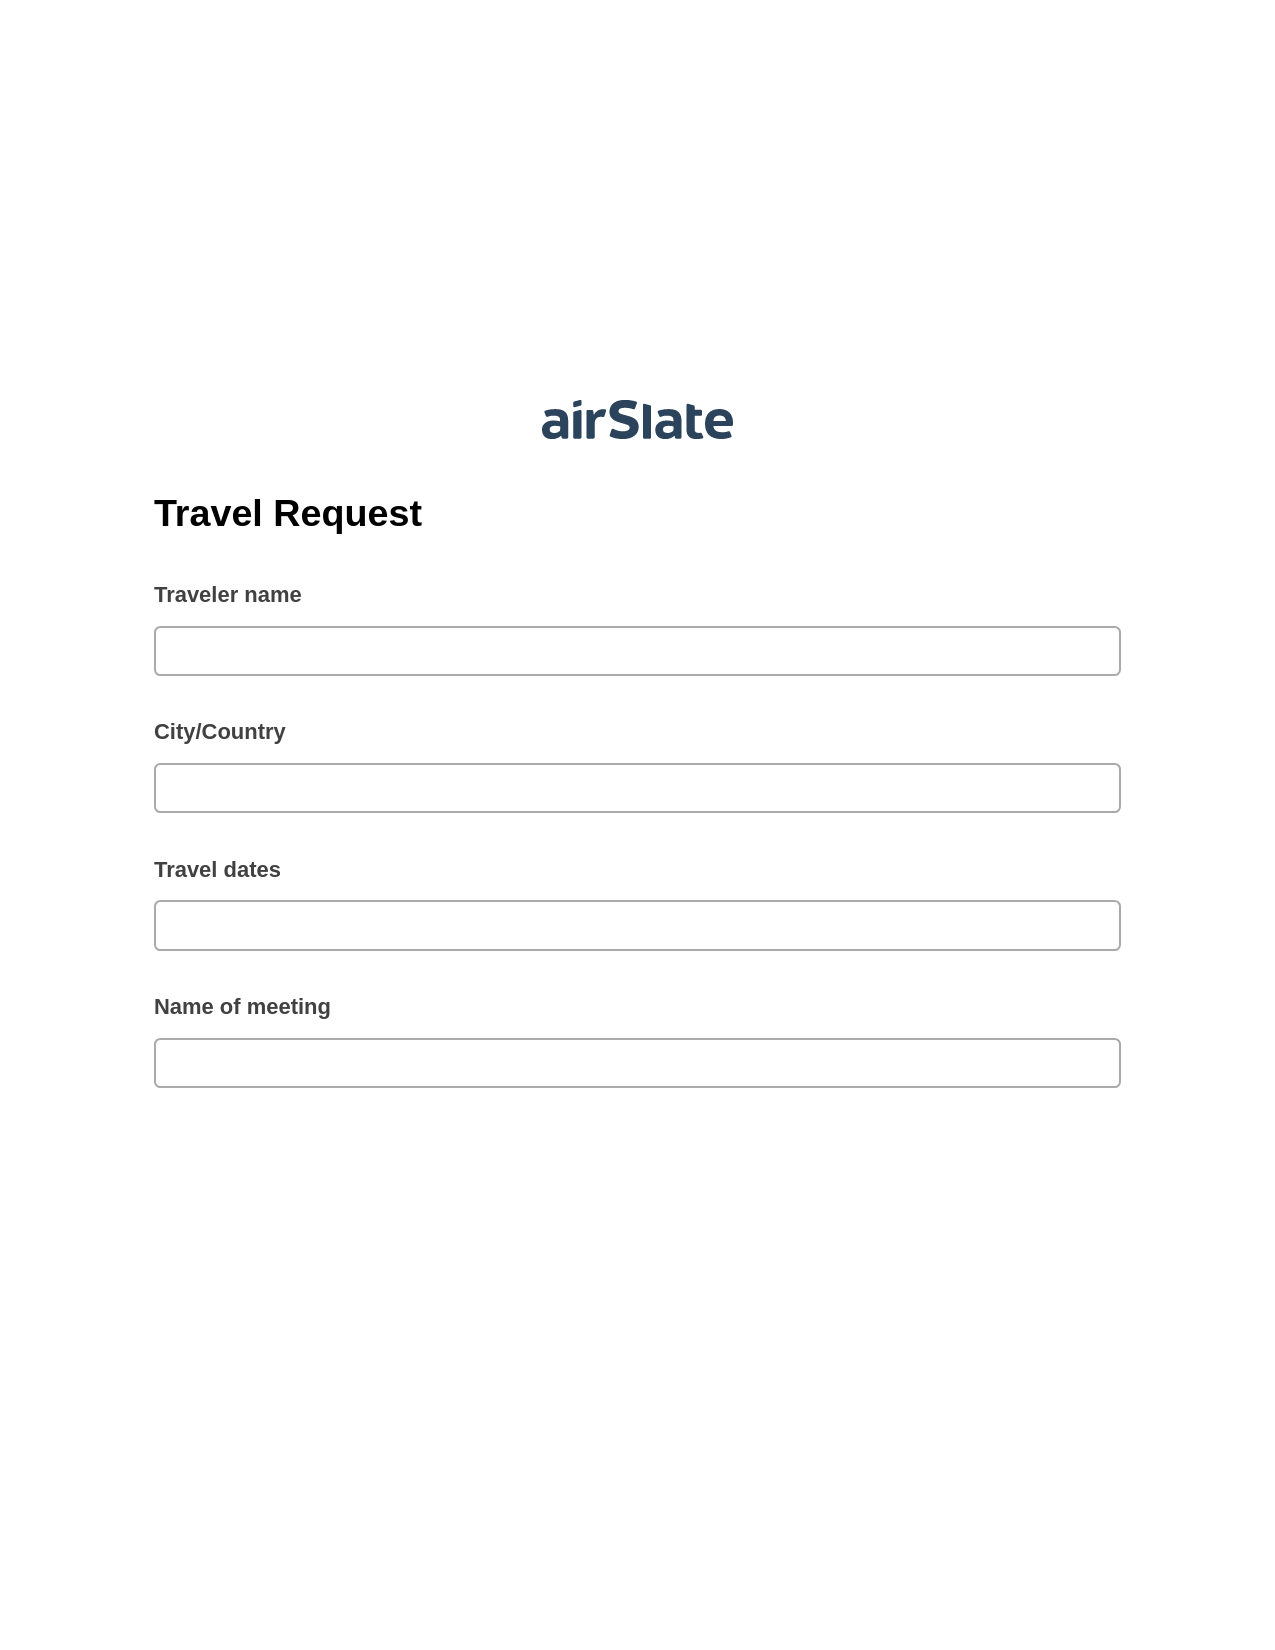 Travel Request Pre-fill Dropdown from Airtable, Create Slate Reminder Bot, Google Drive Bot